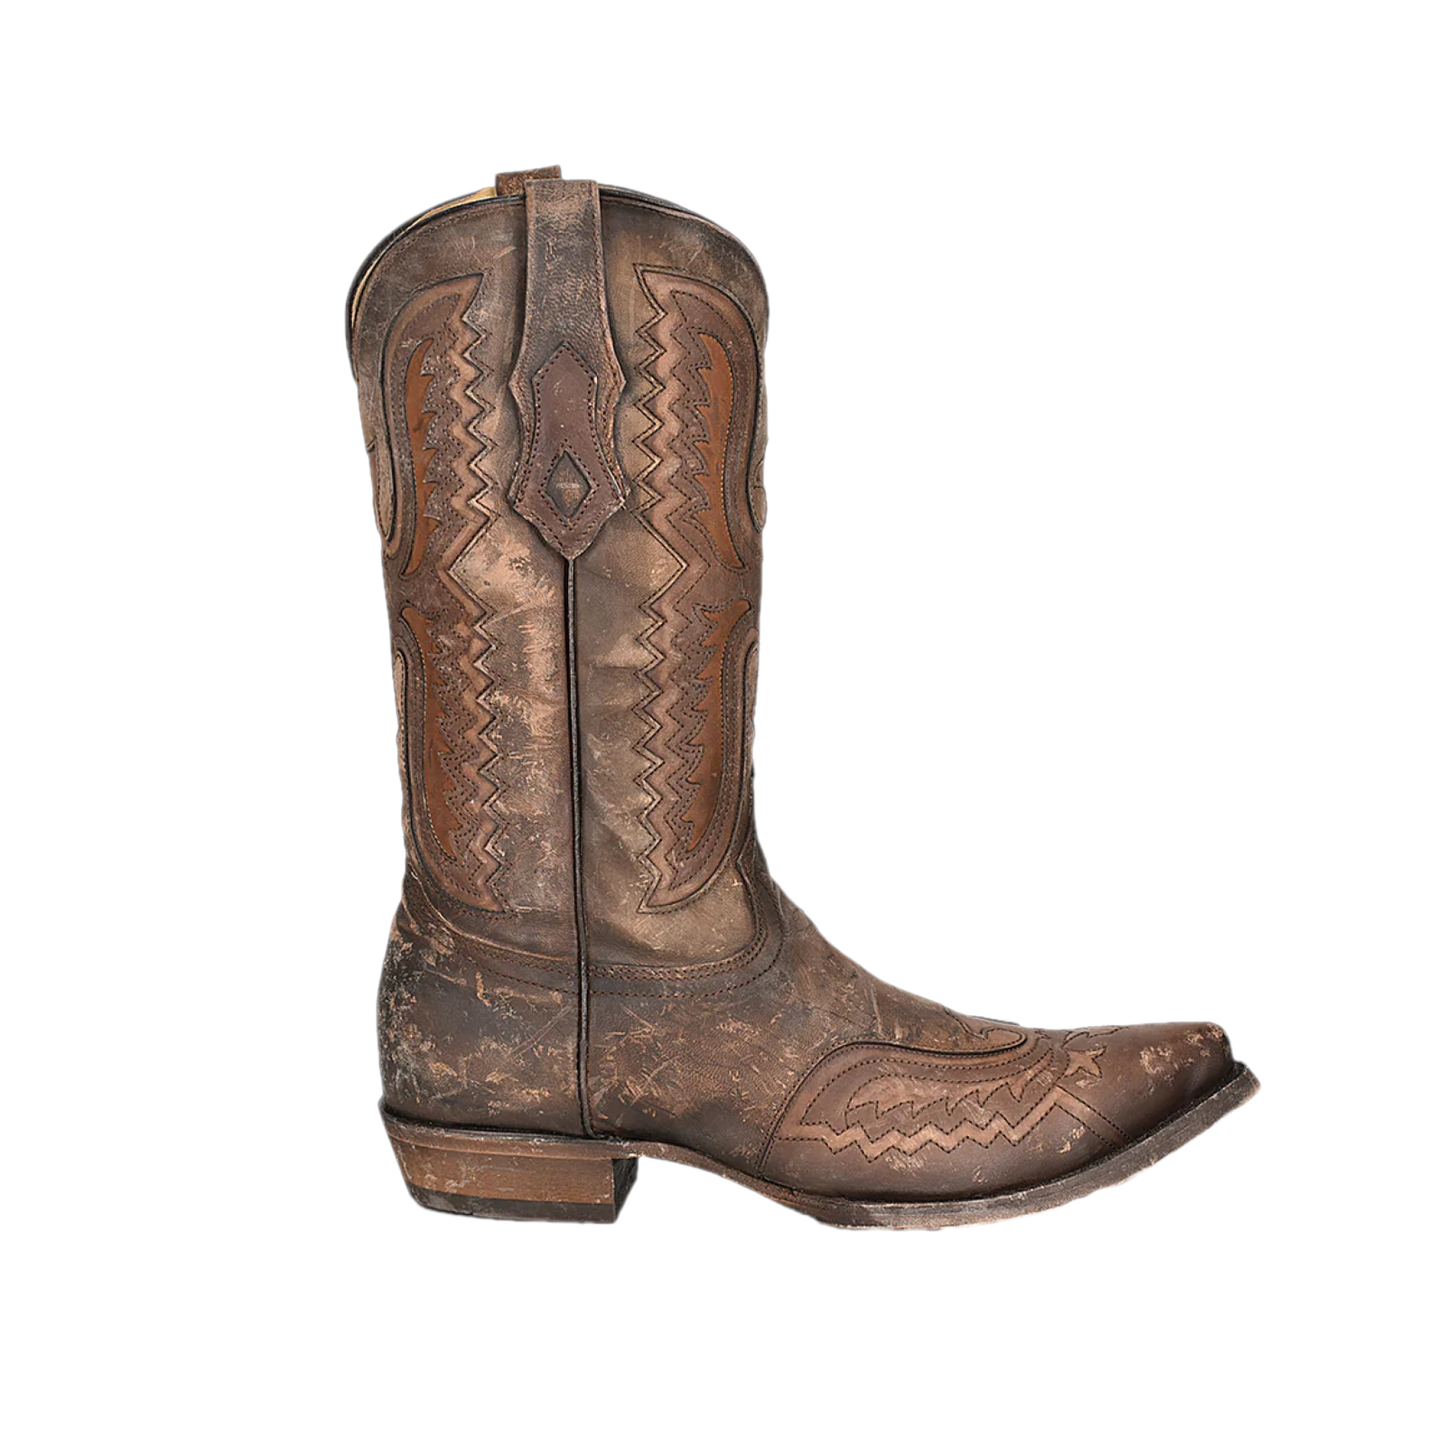 Corral® Men's Distressed Tan Eagle Inlay & Embroidery Snip Toe Boots C3952